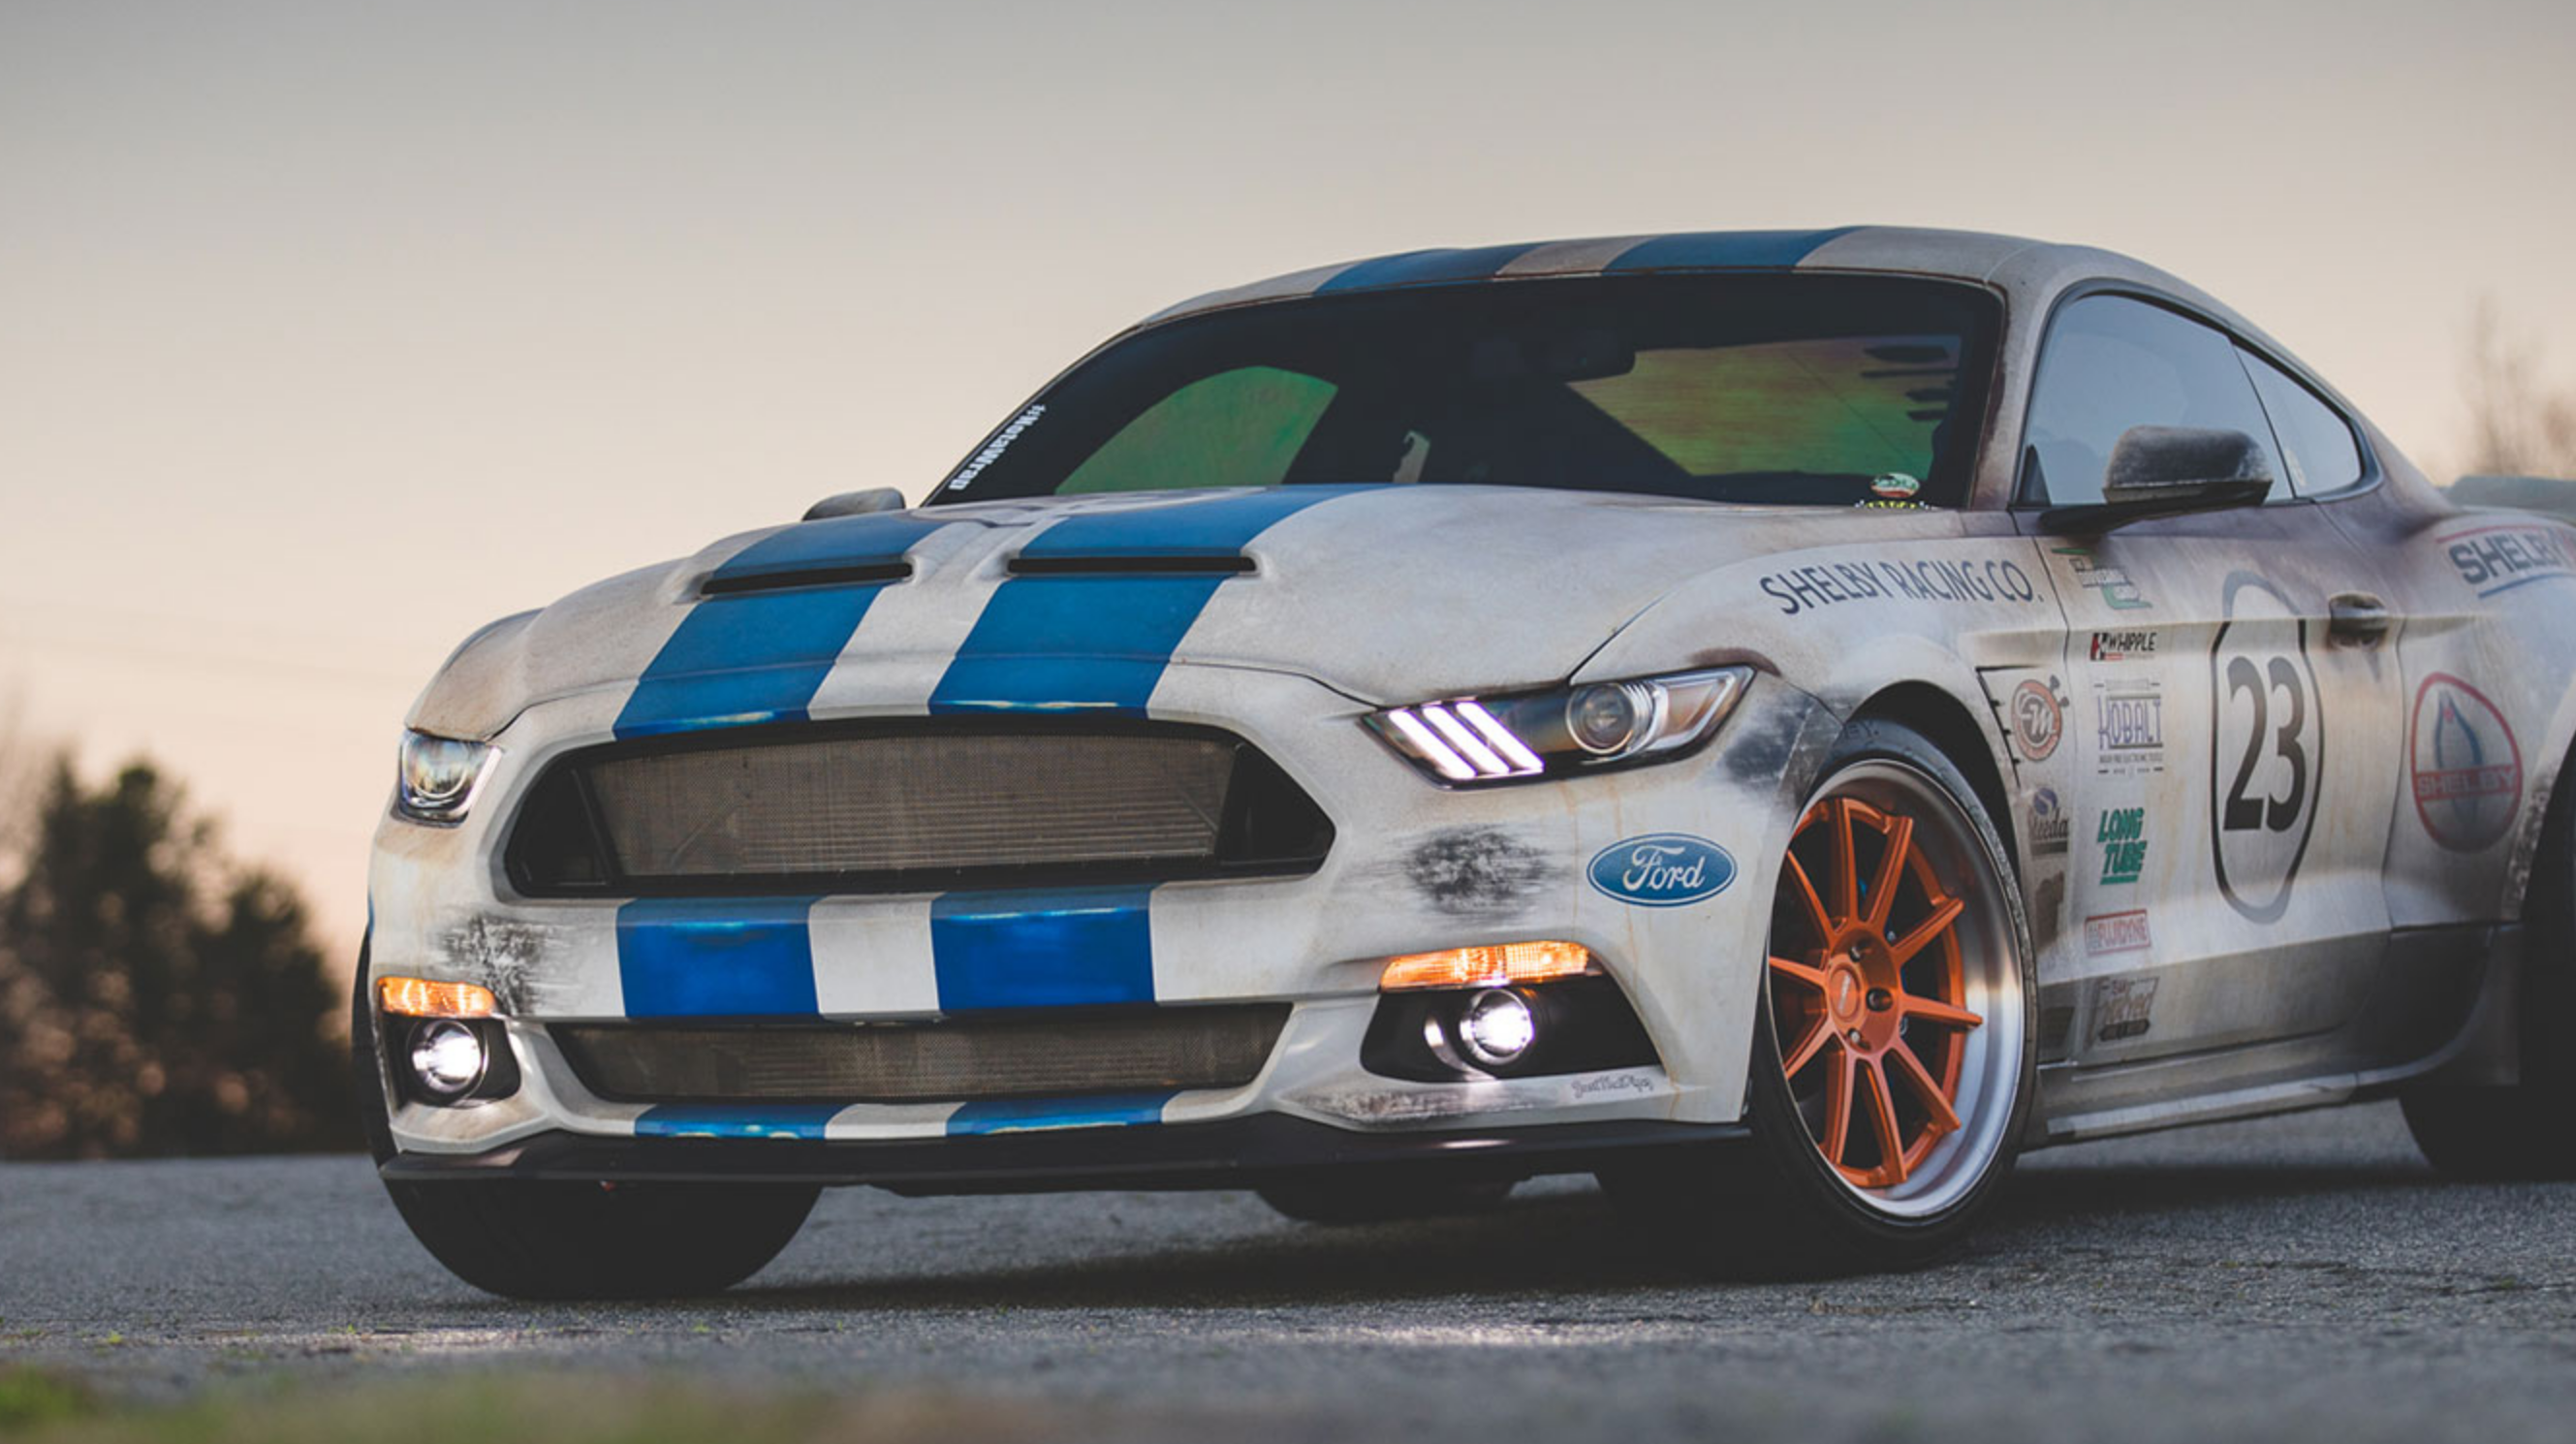 Drift Racer Pays Tribute to Carroll Shelby.